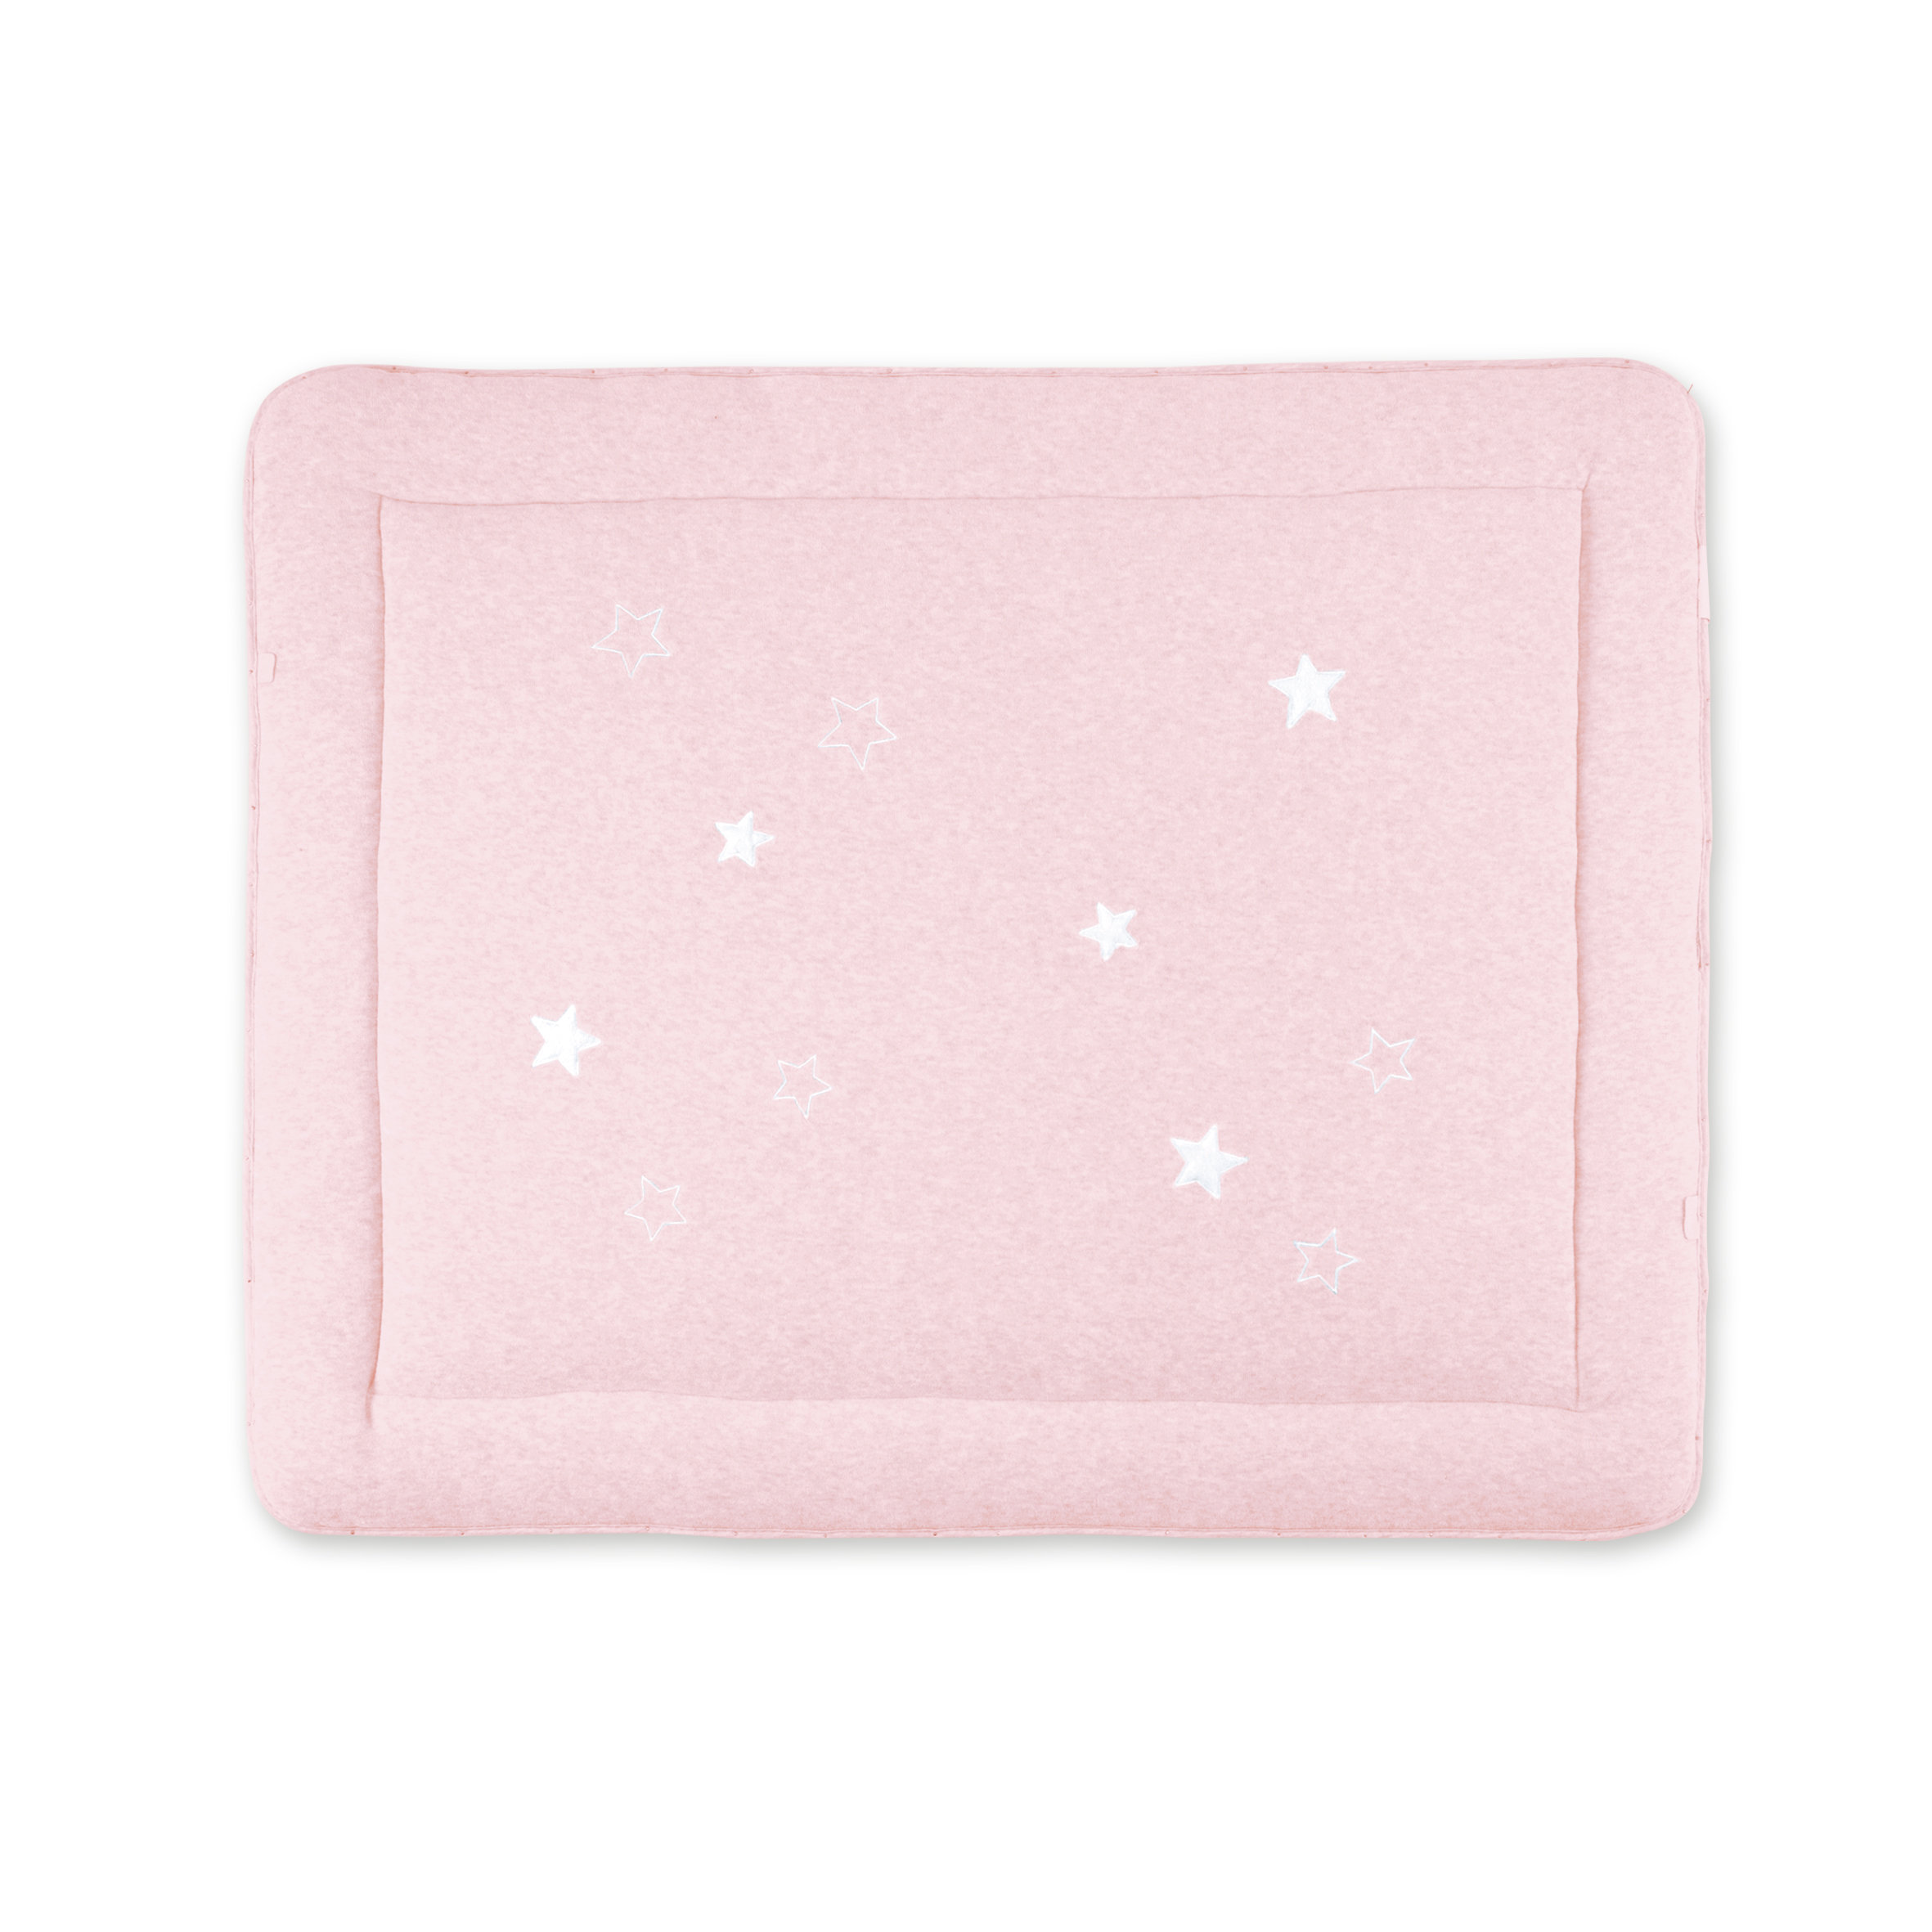 Padded play mat Pady terry + terry 75x95cm STARY Little stars print baby pink